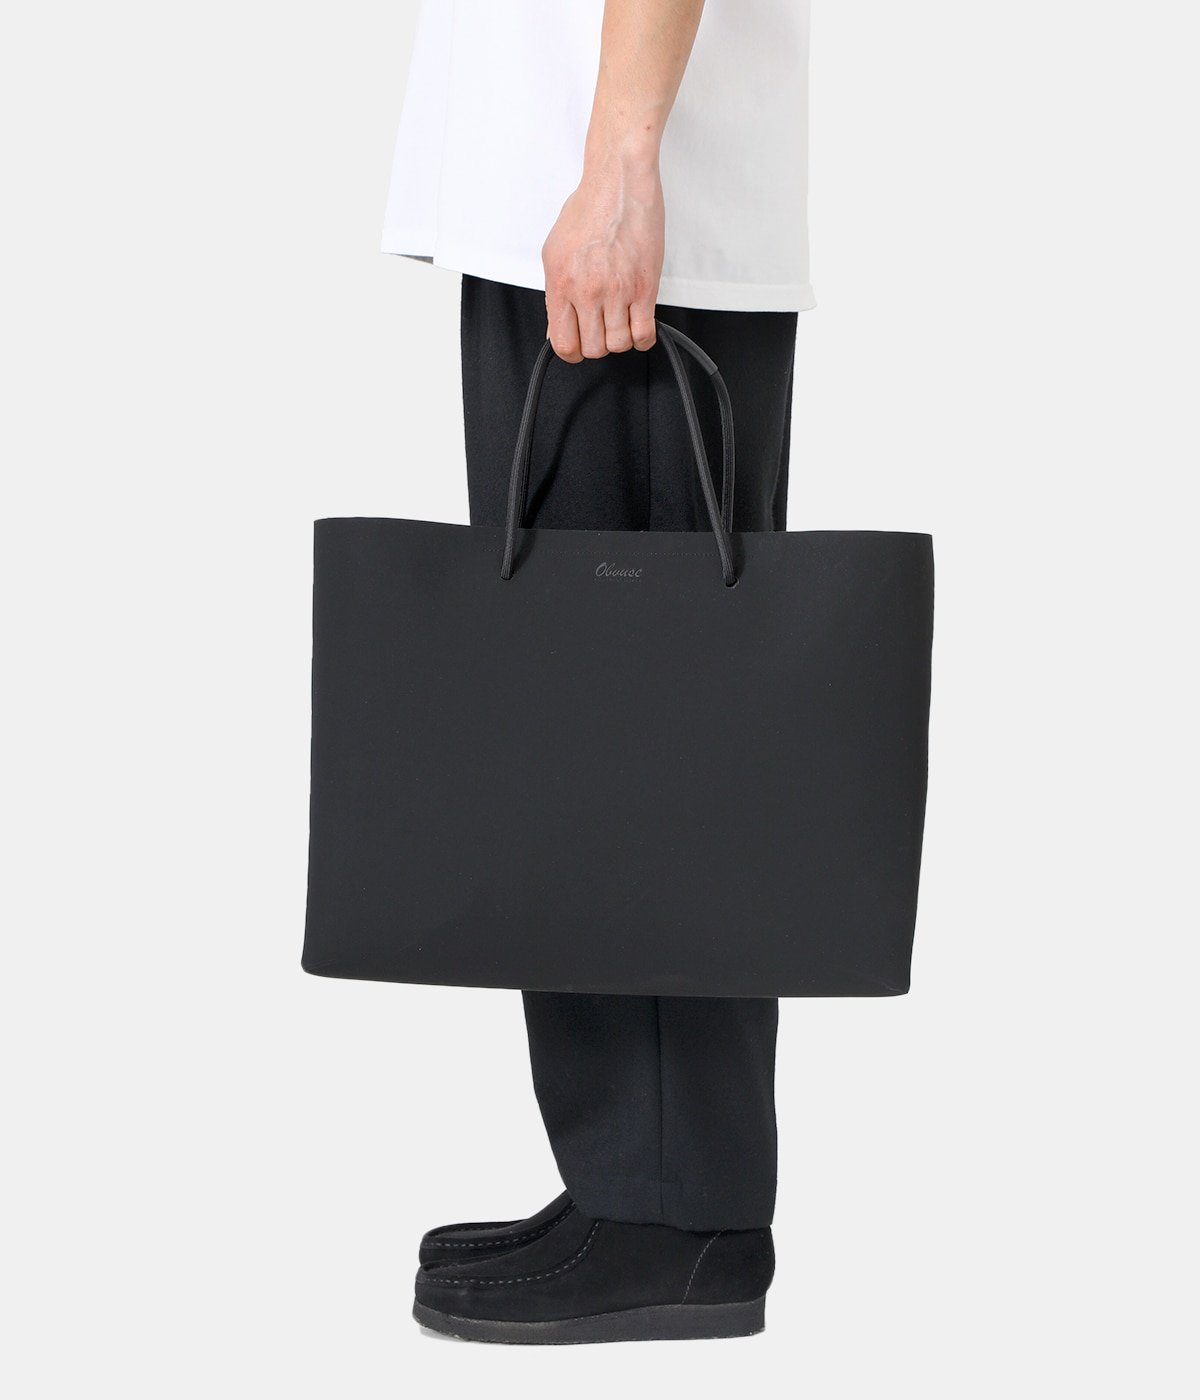 GUM LEATHER TOTE LL | Obvuse(オビューズ) / バッグ トートバッグ